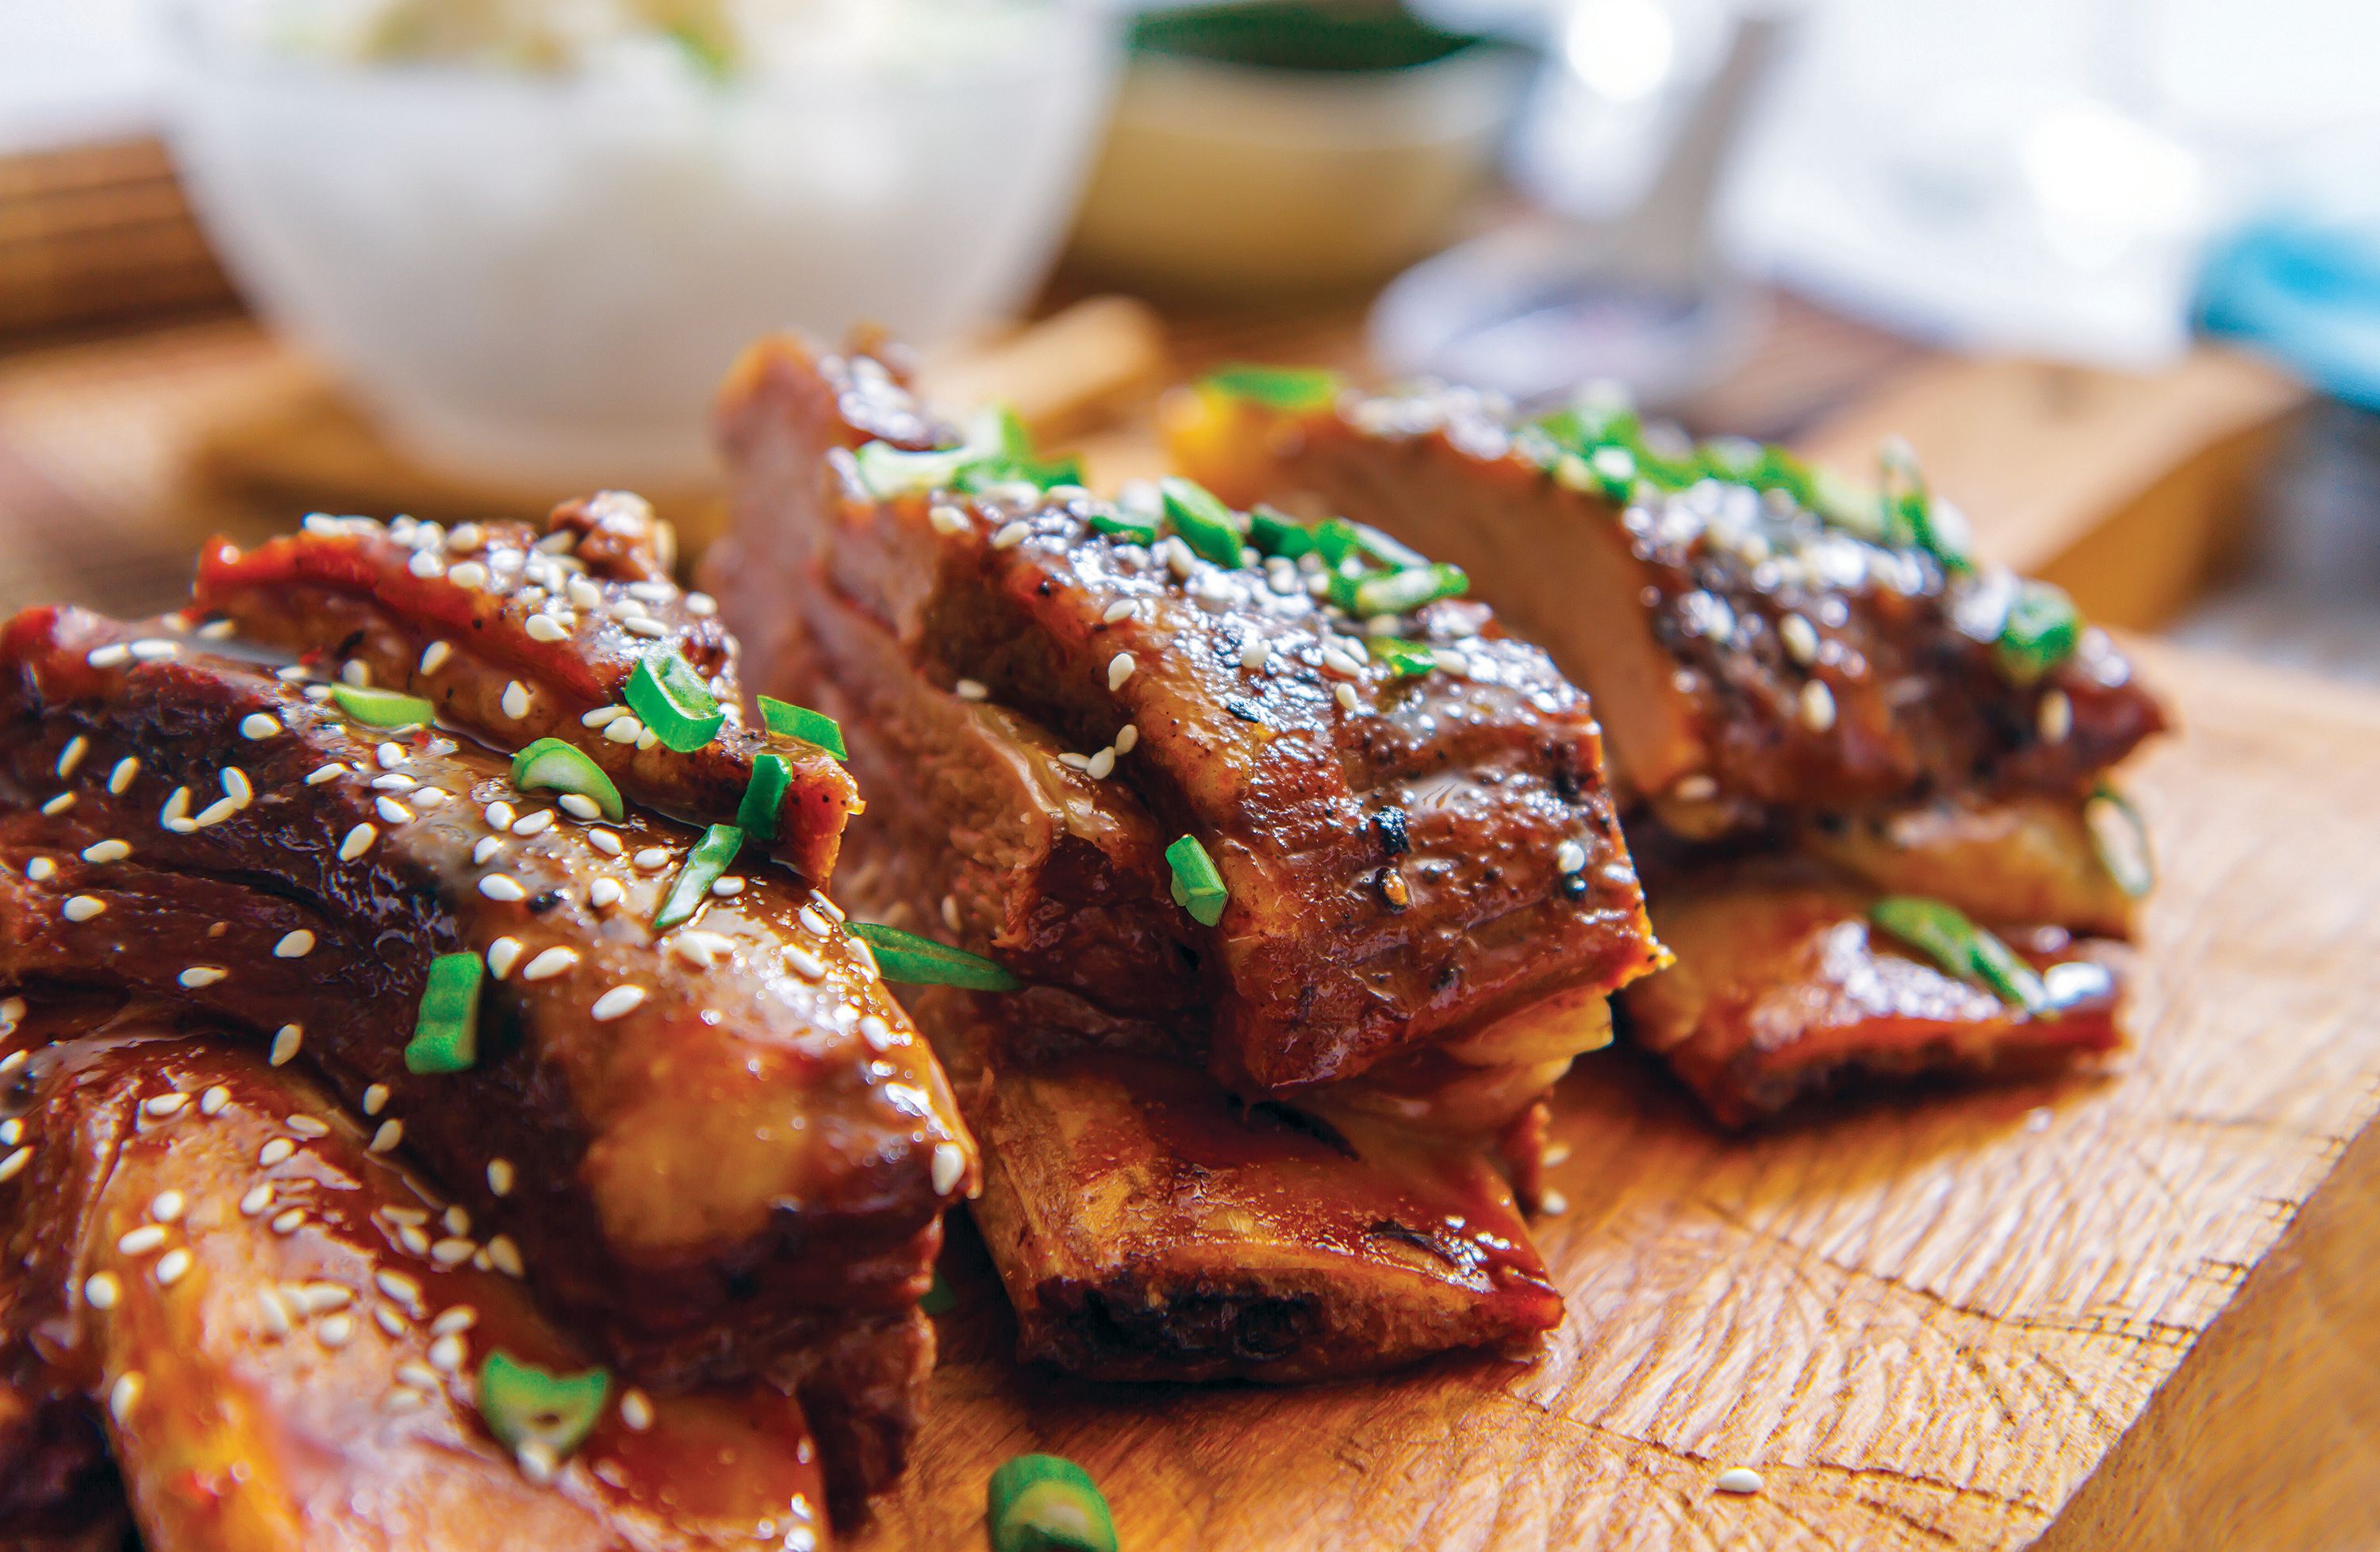 Fully Cooked Veal Short Ribs Now Available to Food Service Customers